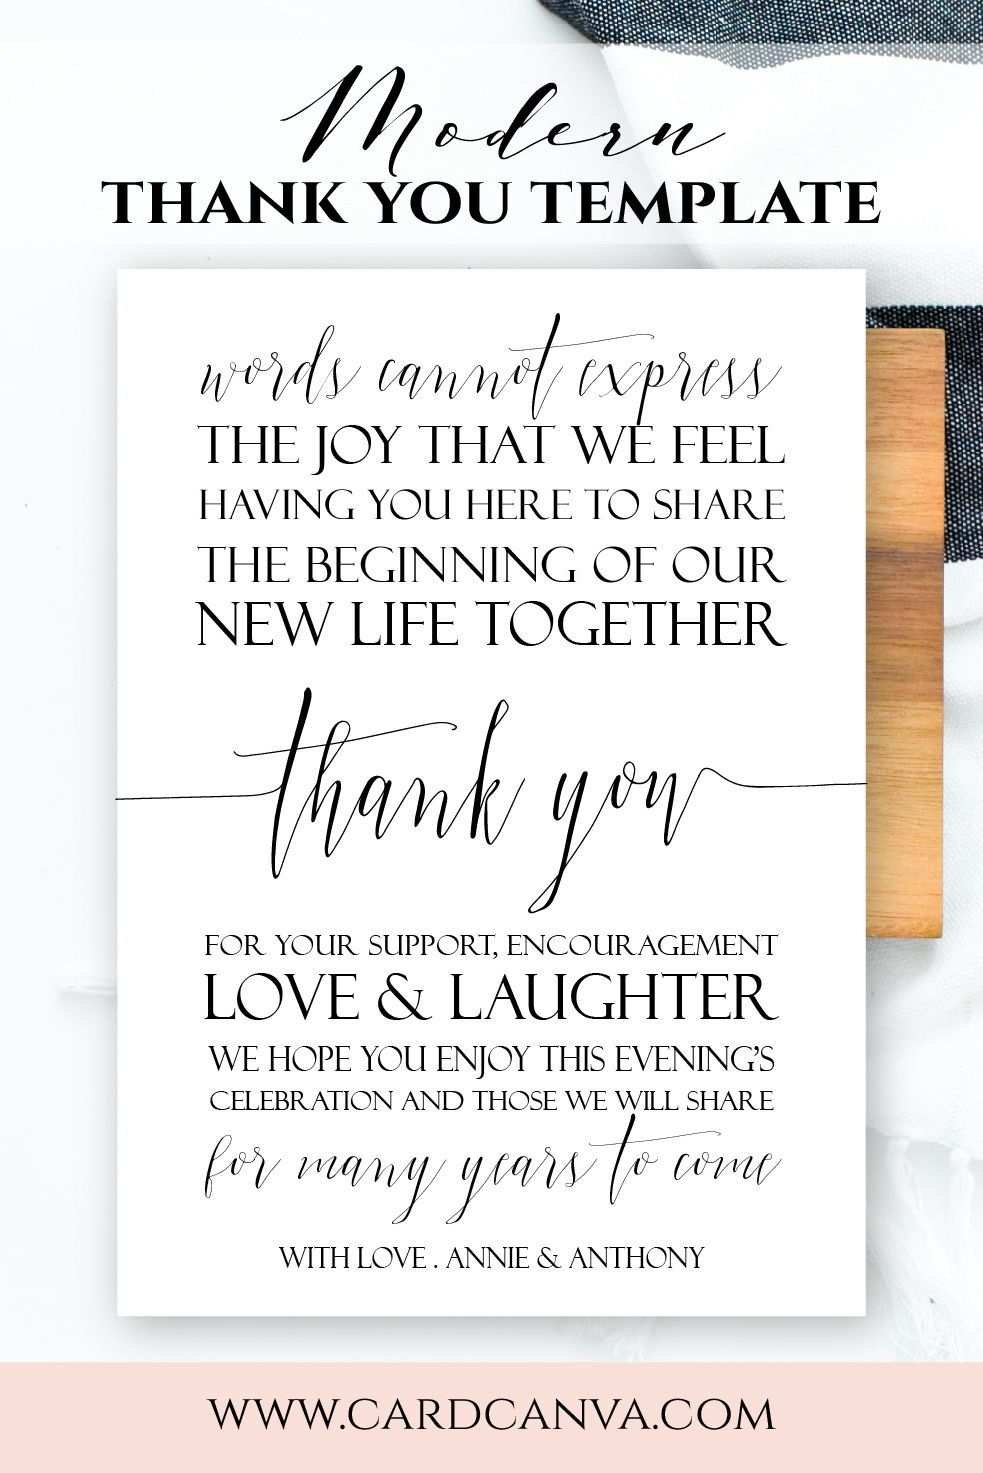 Thank You Card Template Publisher in Usmc Meal Card Template